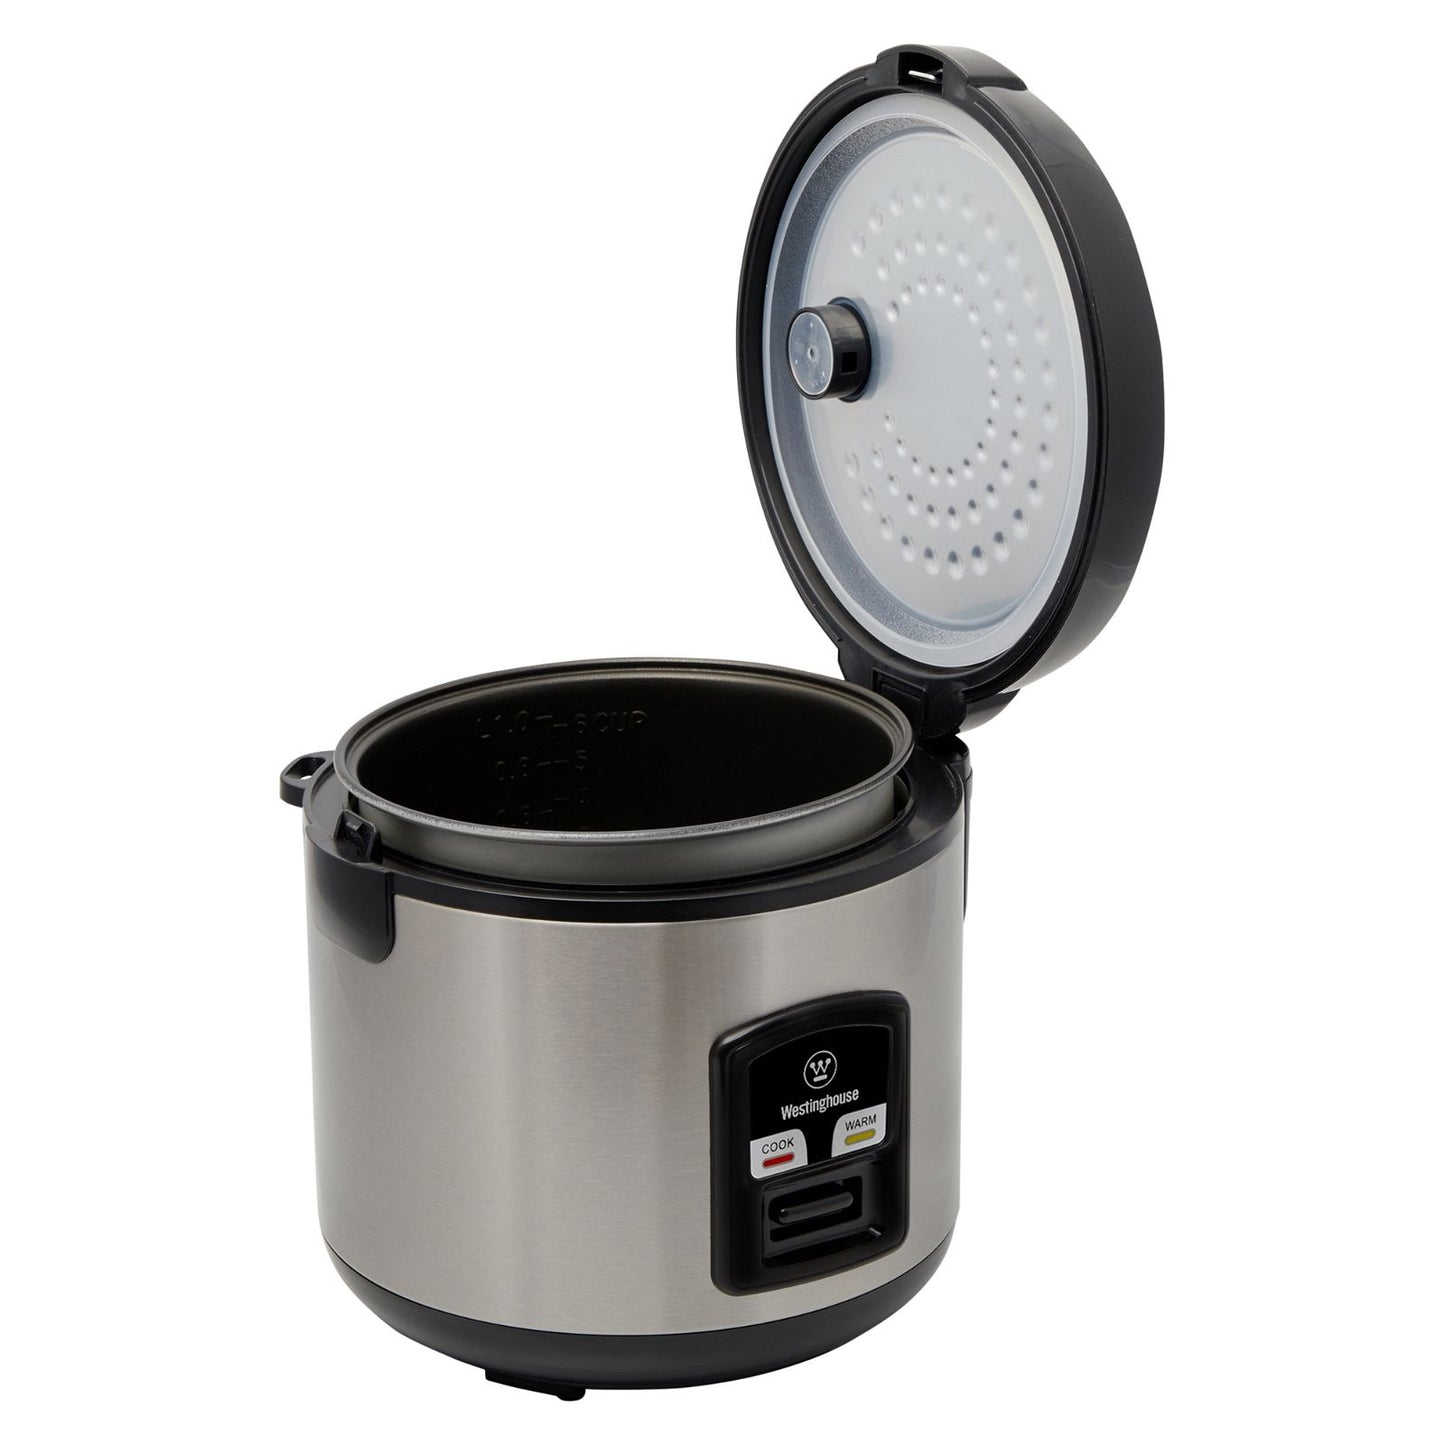 Westinghouse 6 Cup Rice Cooker Keep Warm Function-#product_category#- Distributed by:  under license